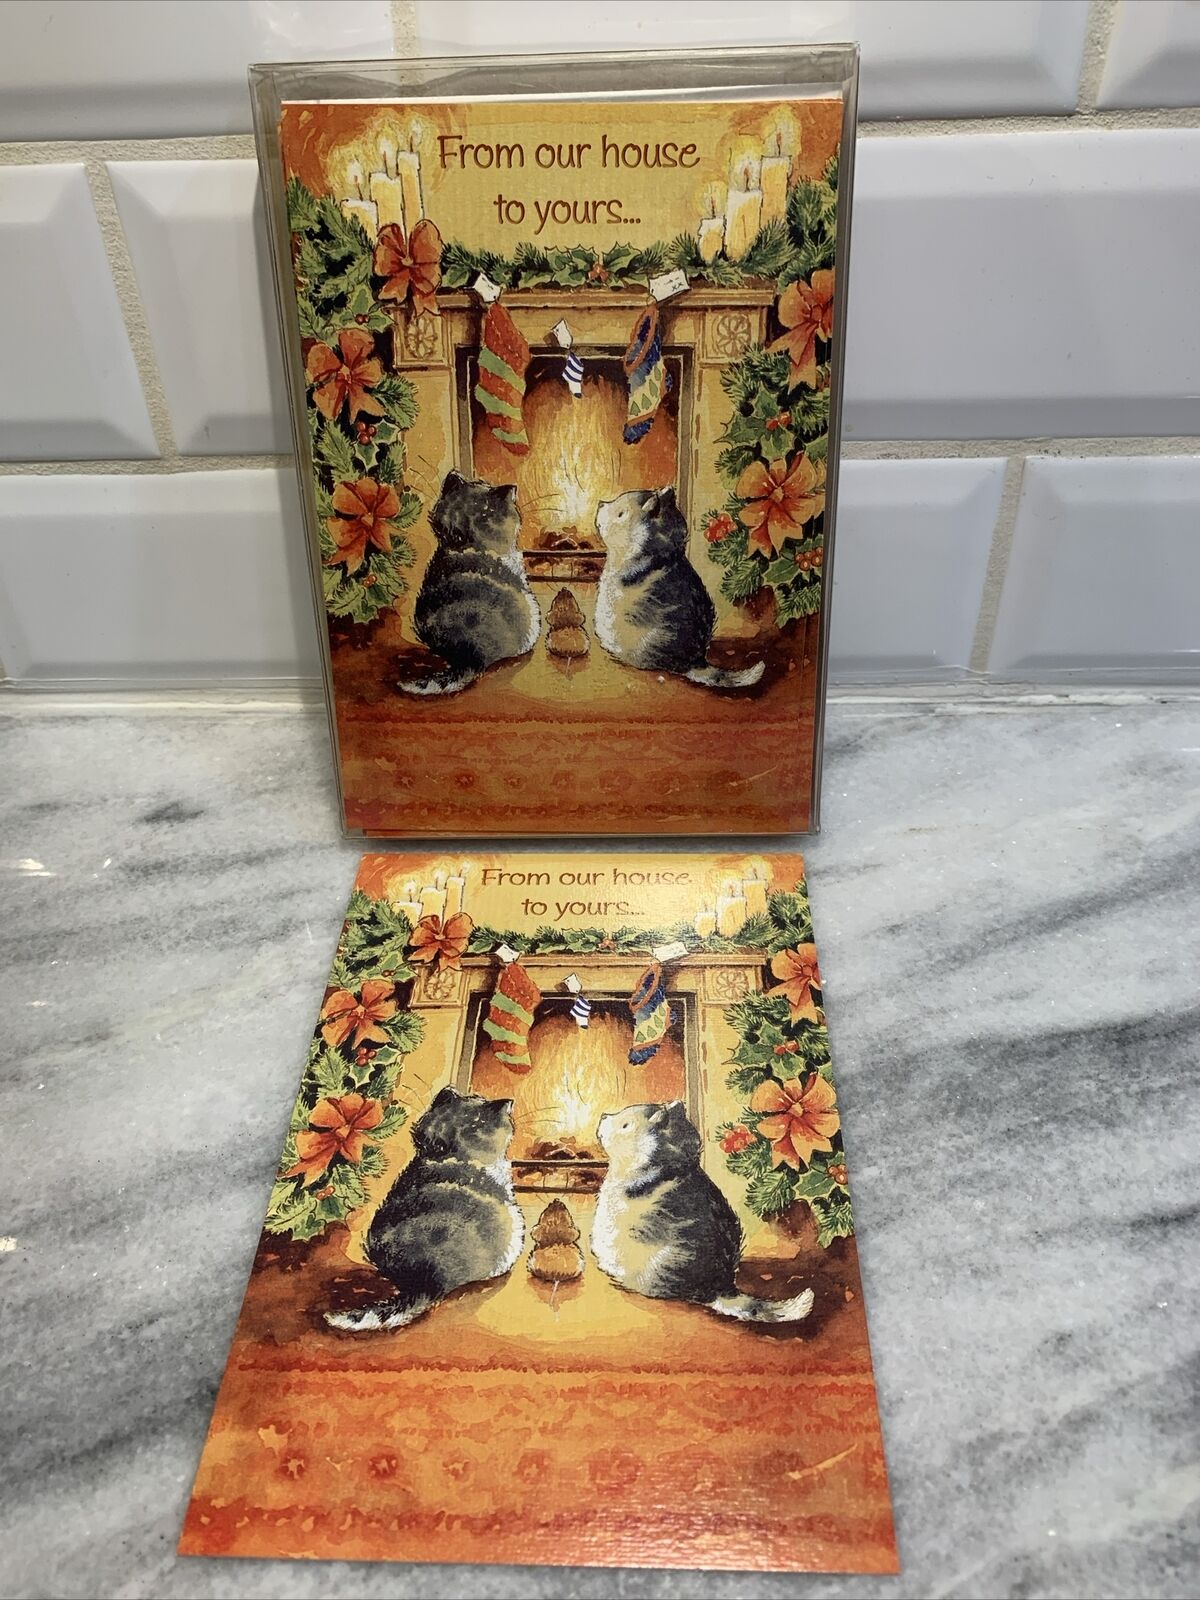 Vintage Leanin’ Tree Kittens At Fireplace Christmas Cards Artist Margaret Sherry